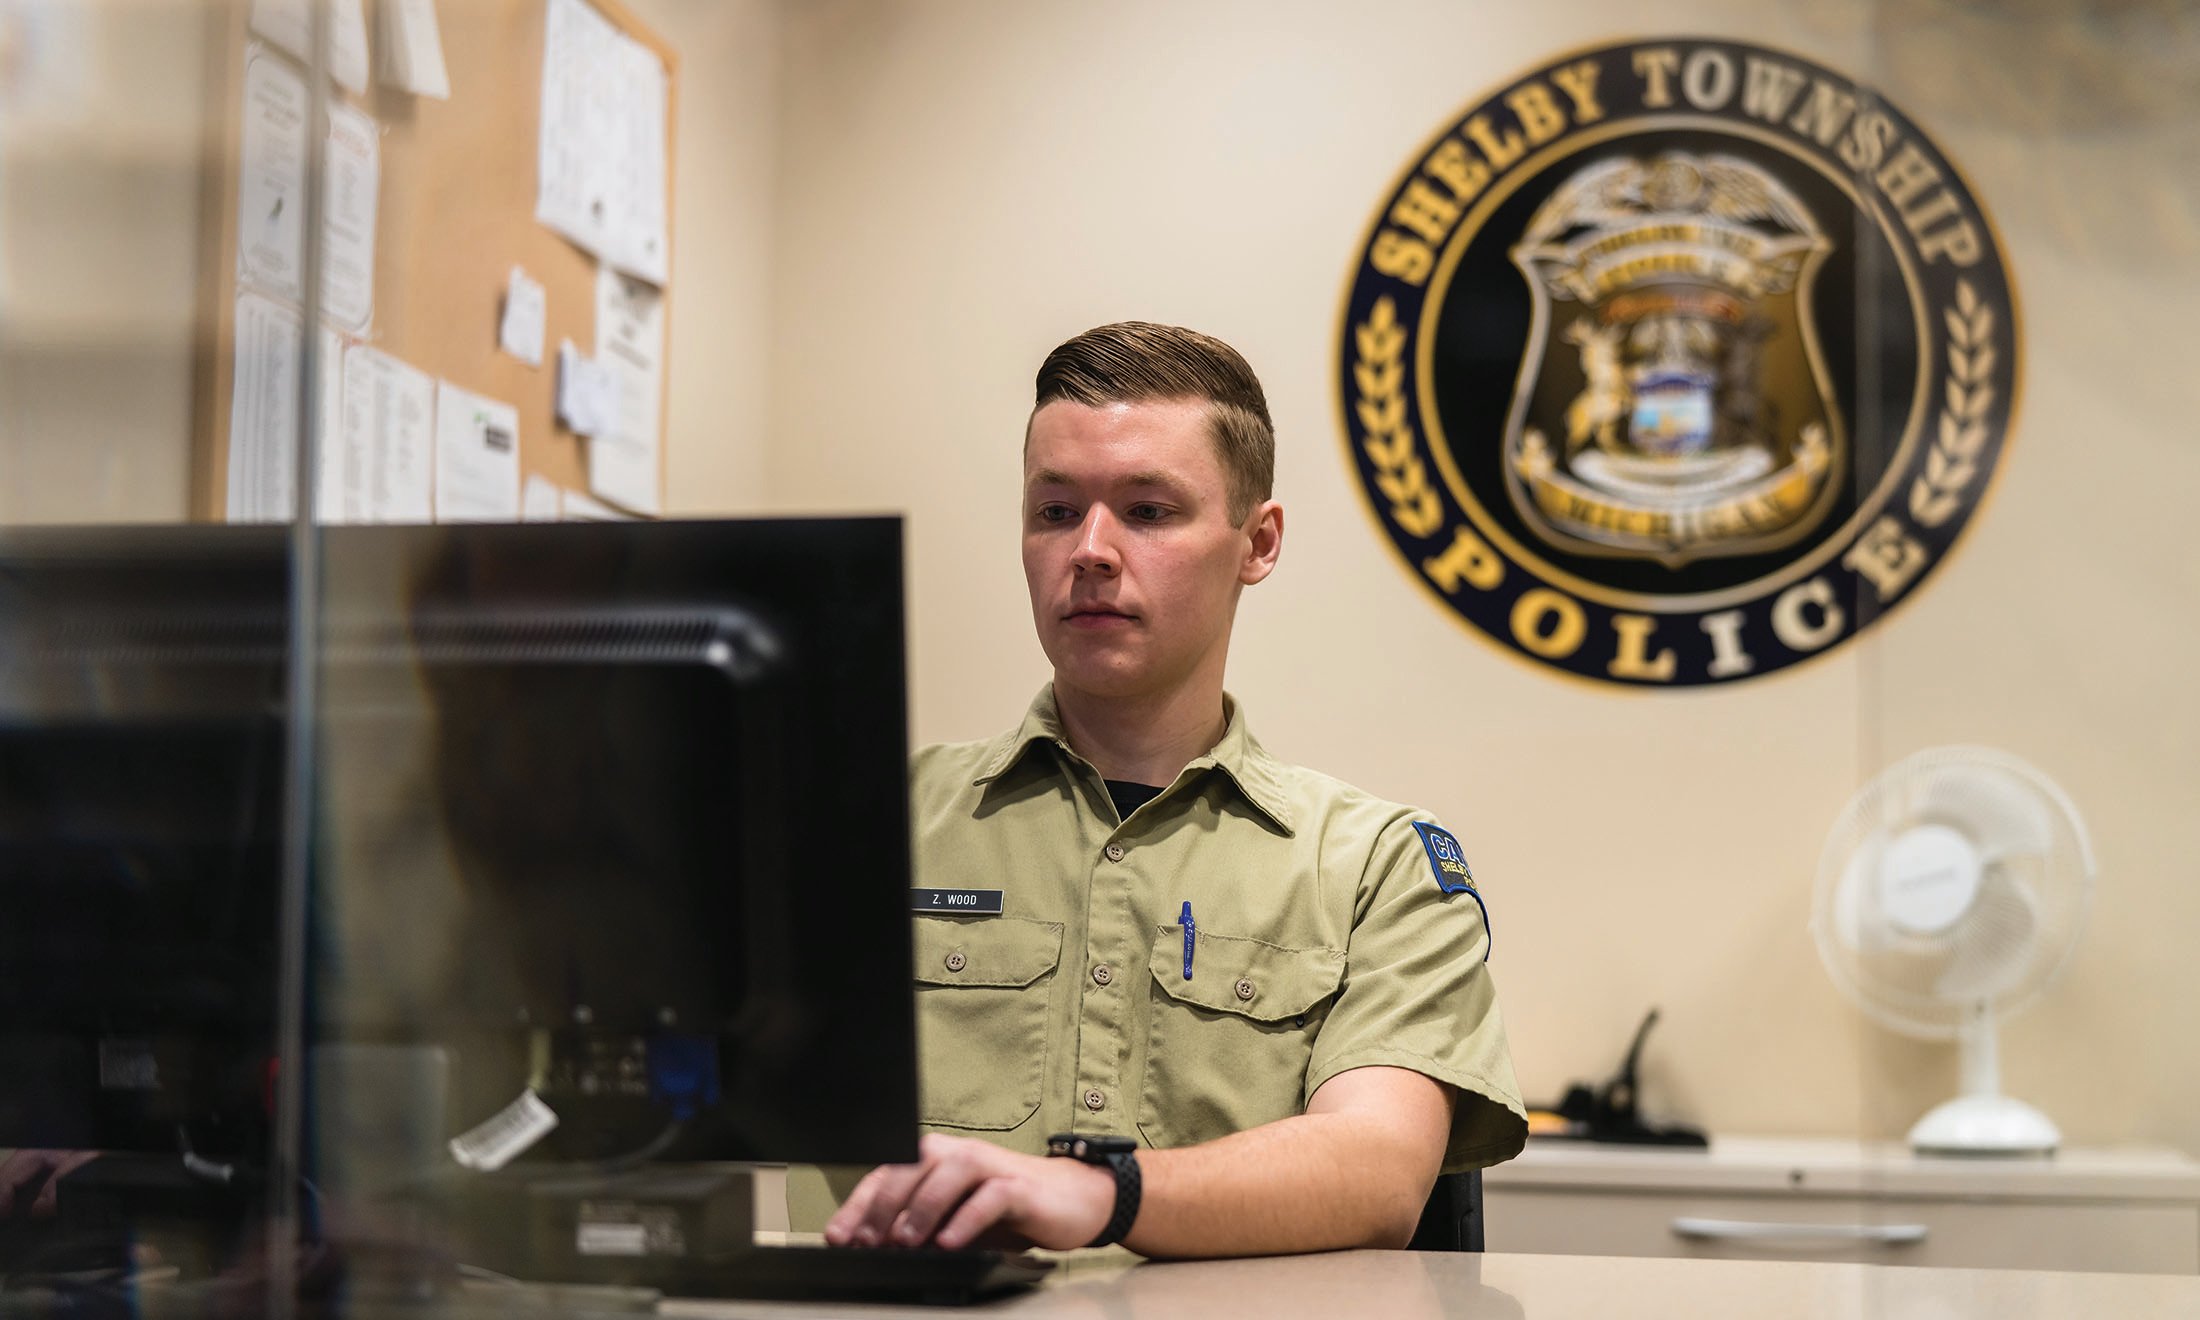 Male student sits at computer in Shelby Township Police Department